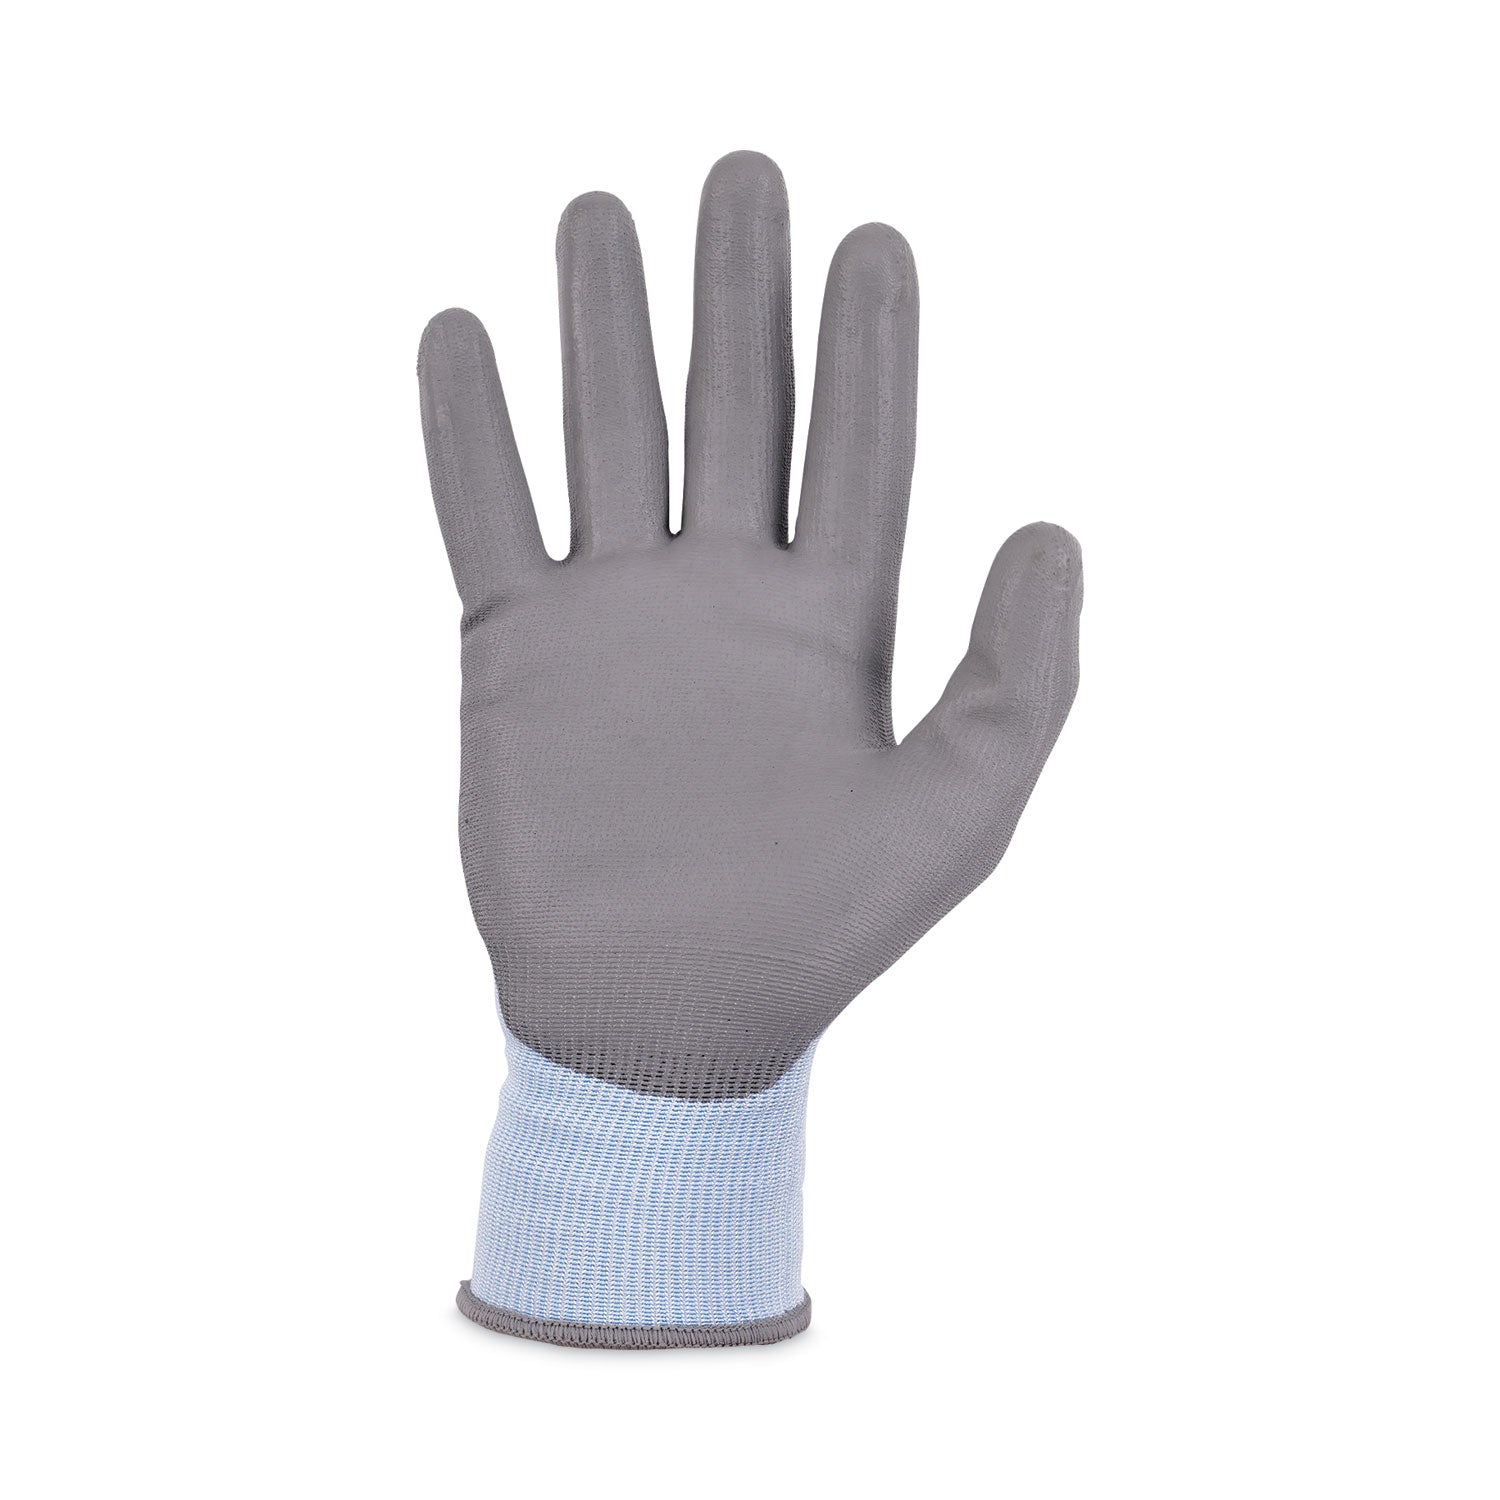 proflex-7025-ansi-a2-pu-coated-cr-gloves-blue-medium-12-pairs-pack-ships-in-1-3-business-days_ego10423 - 2